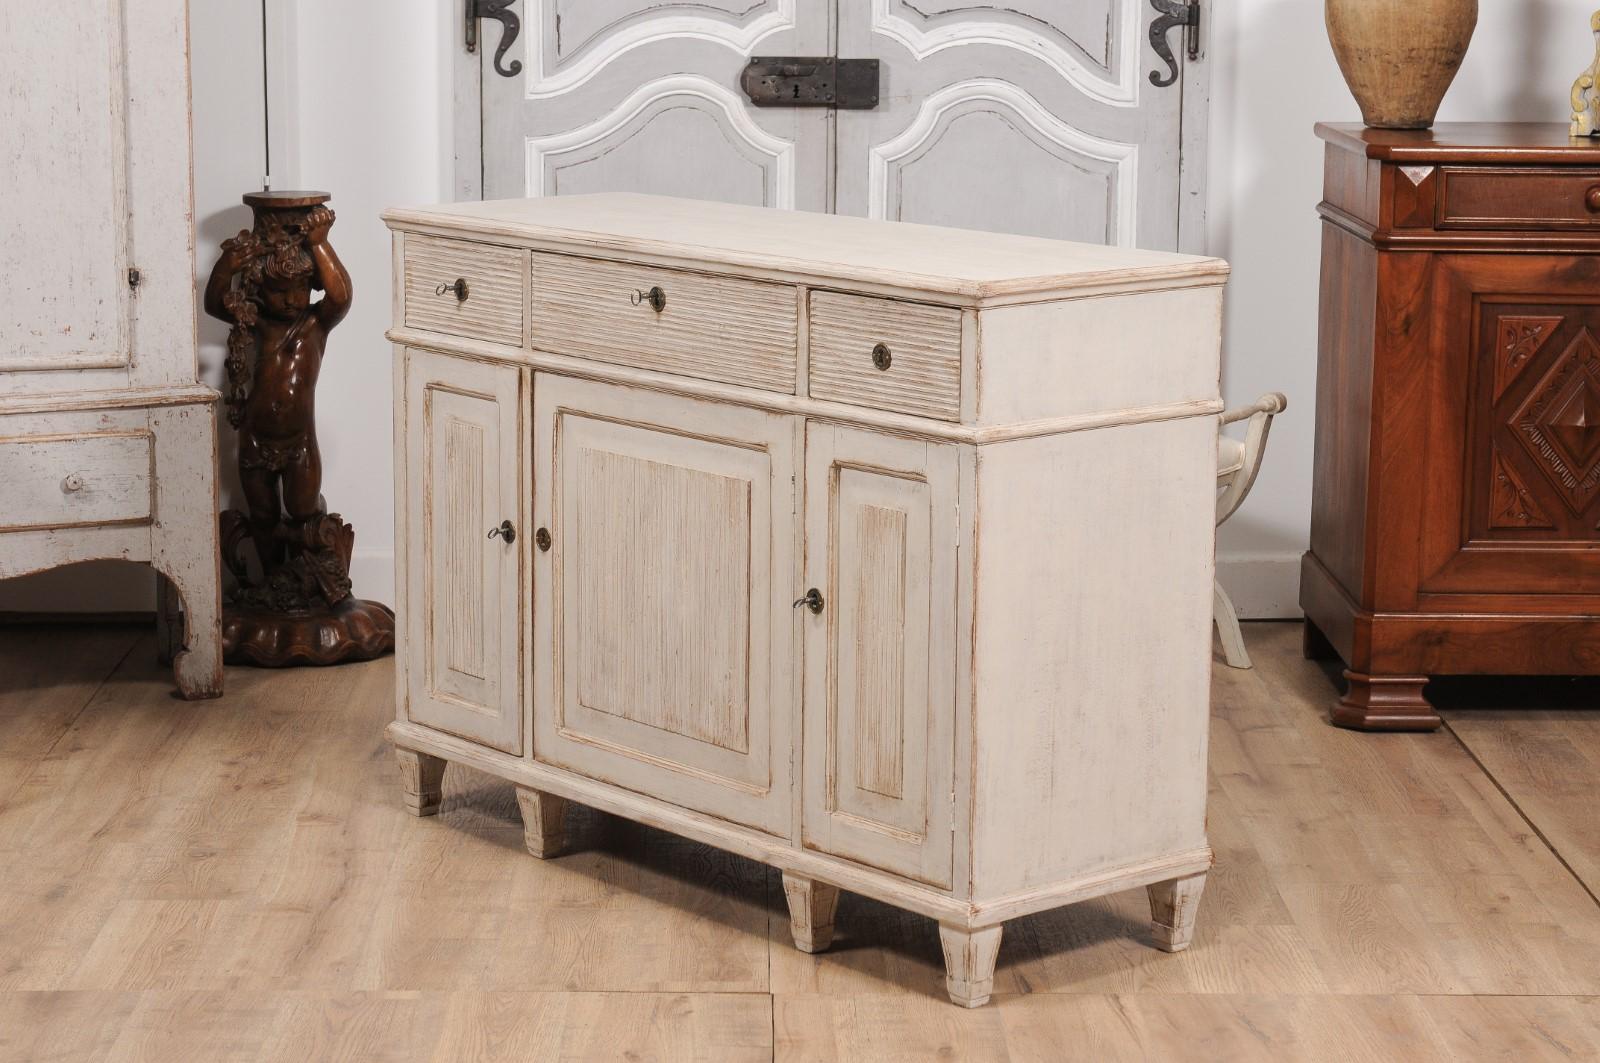 Swedish 1860s Creamy Gray Painted Sideboard with Reeded Doors and Drawers For Sale 3